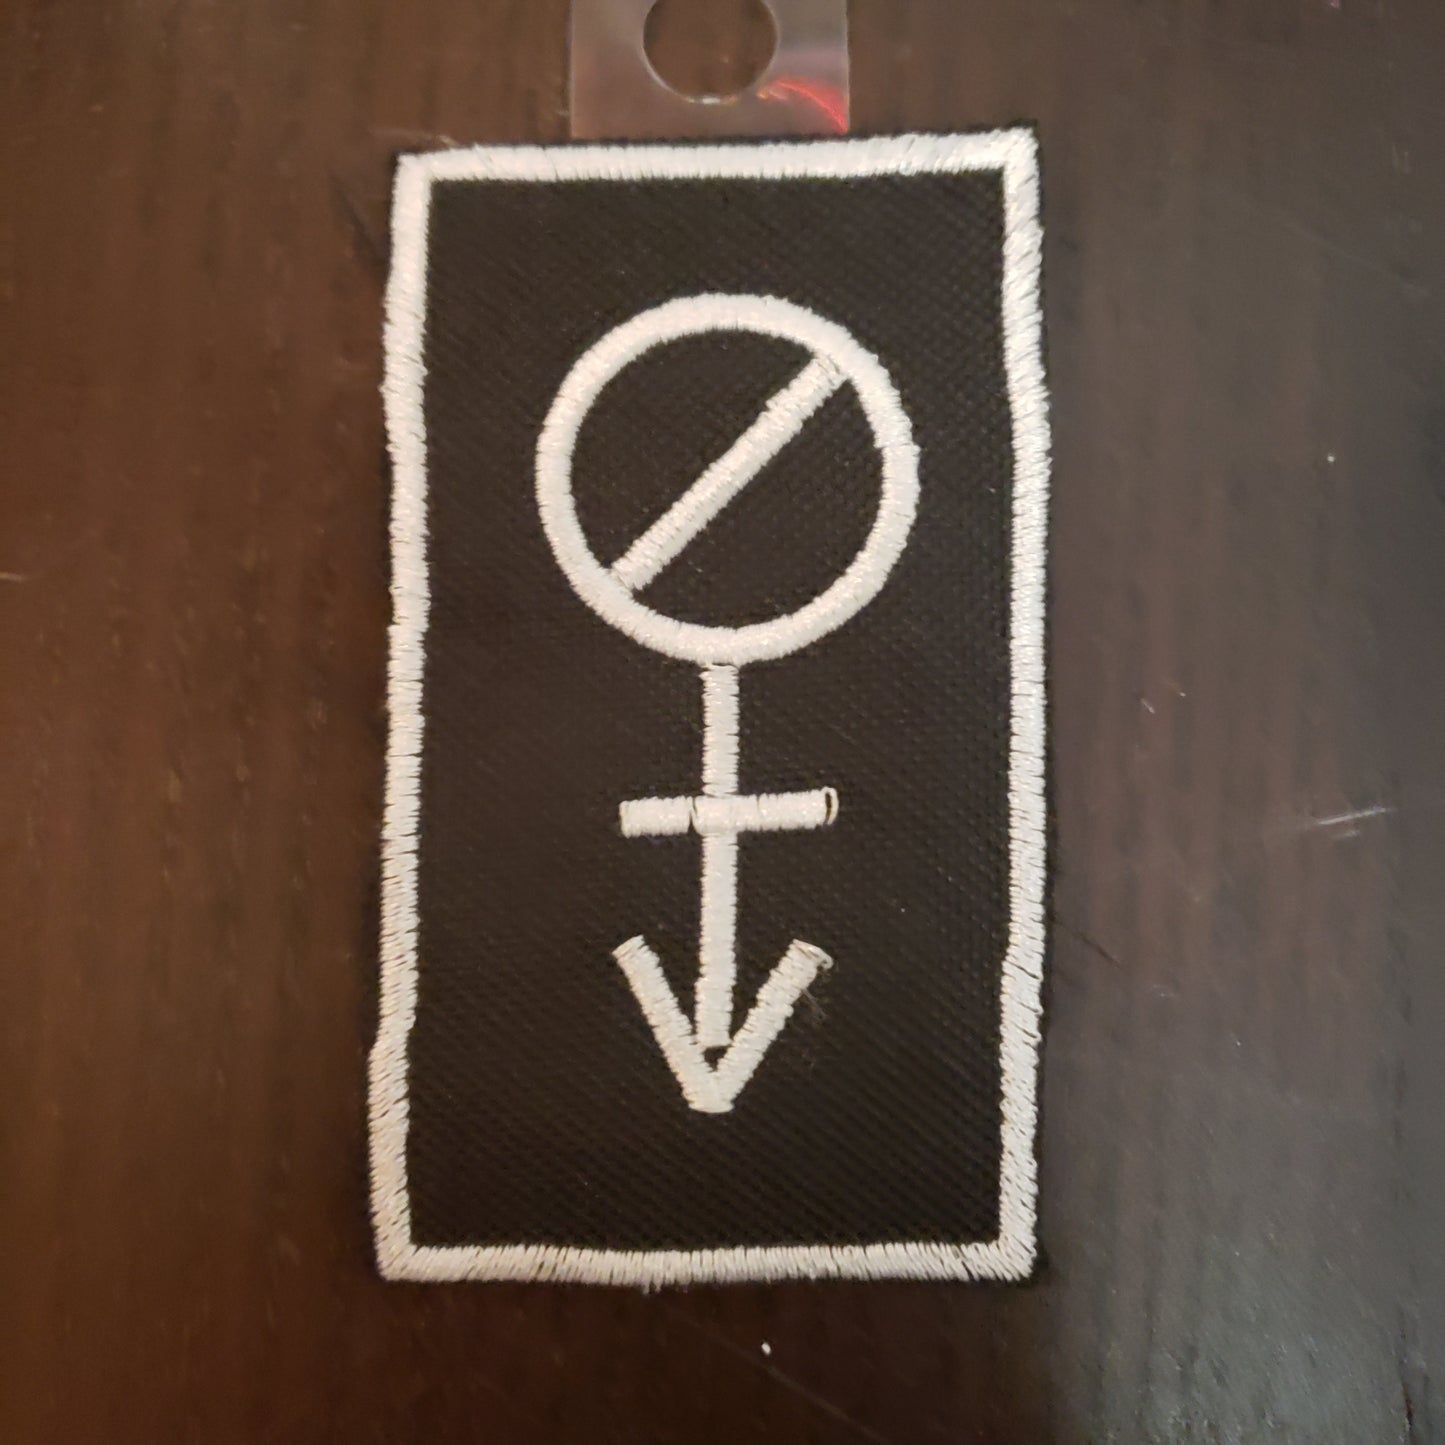 The Agender Leather Bar Lapel Patch.